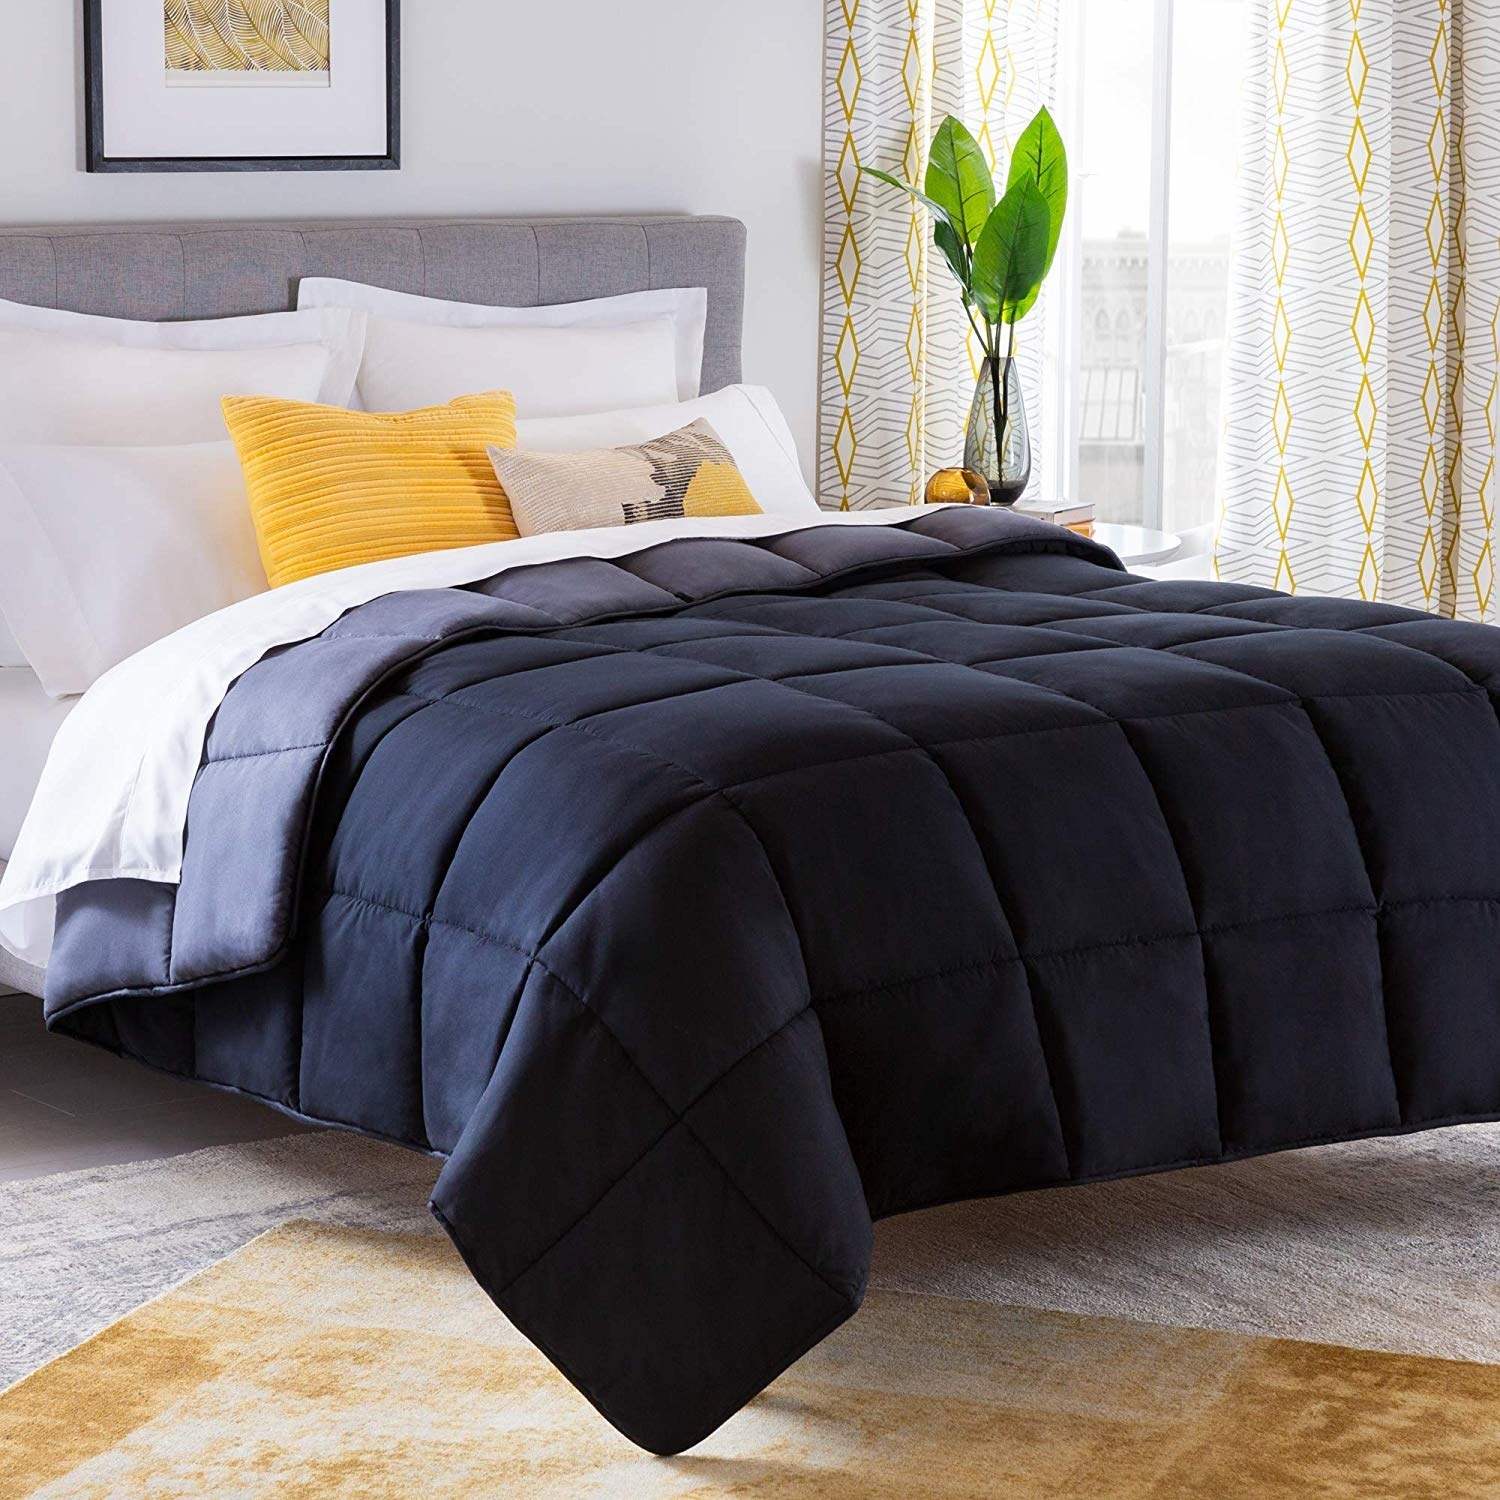 the quilted comforter in blue